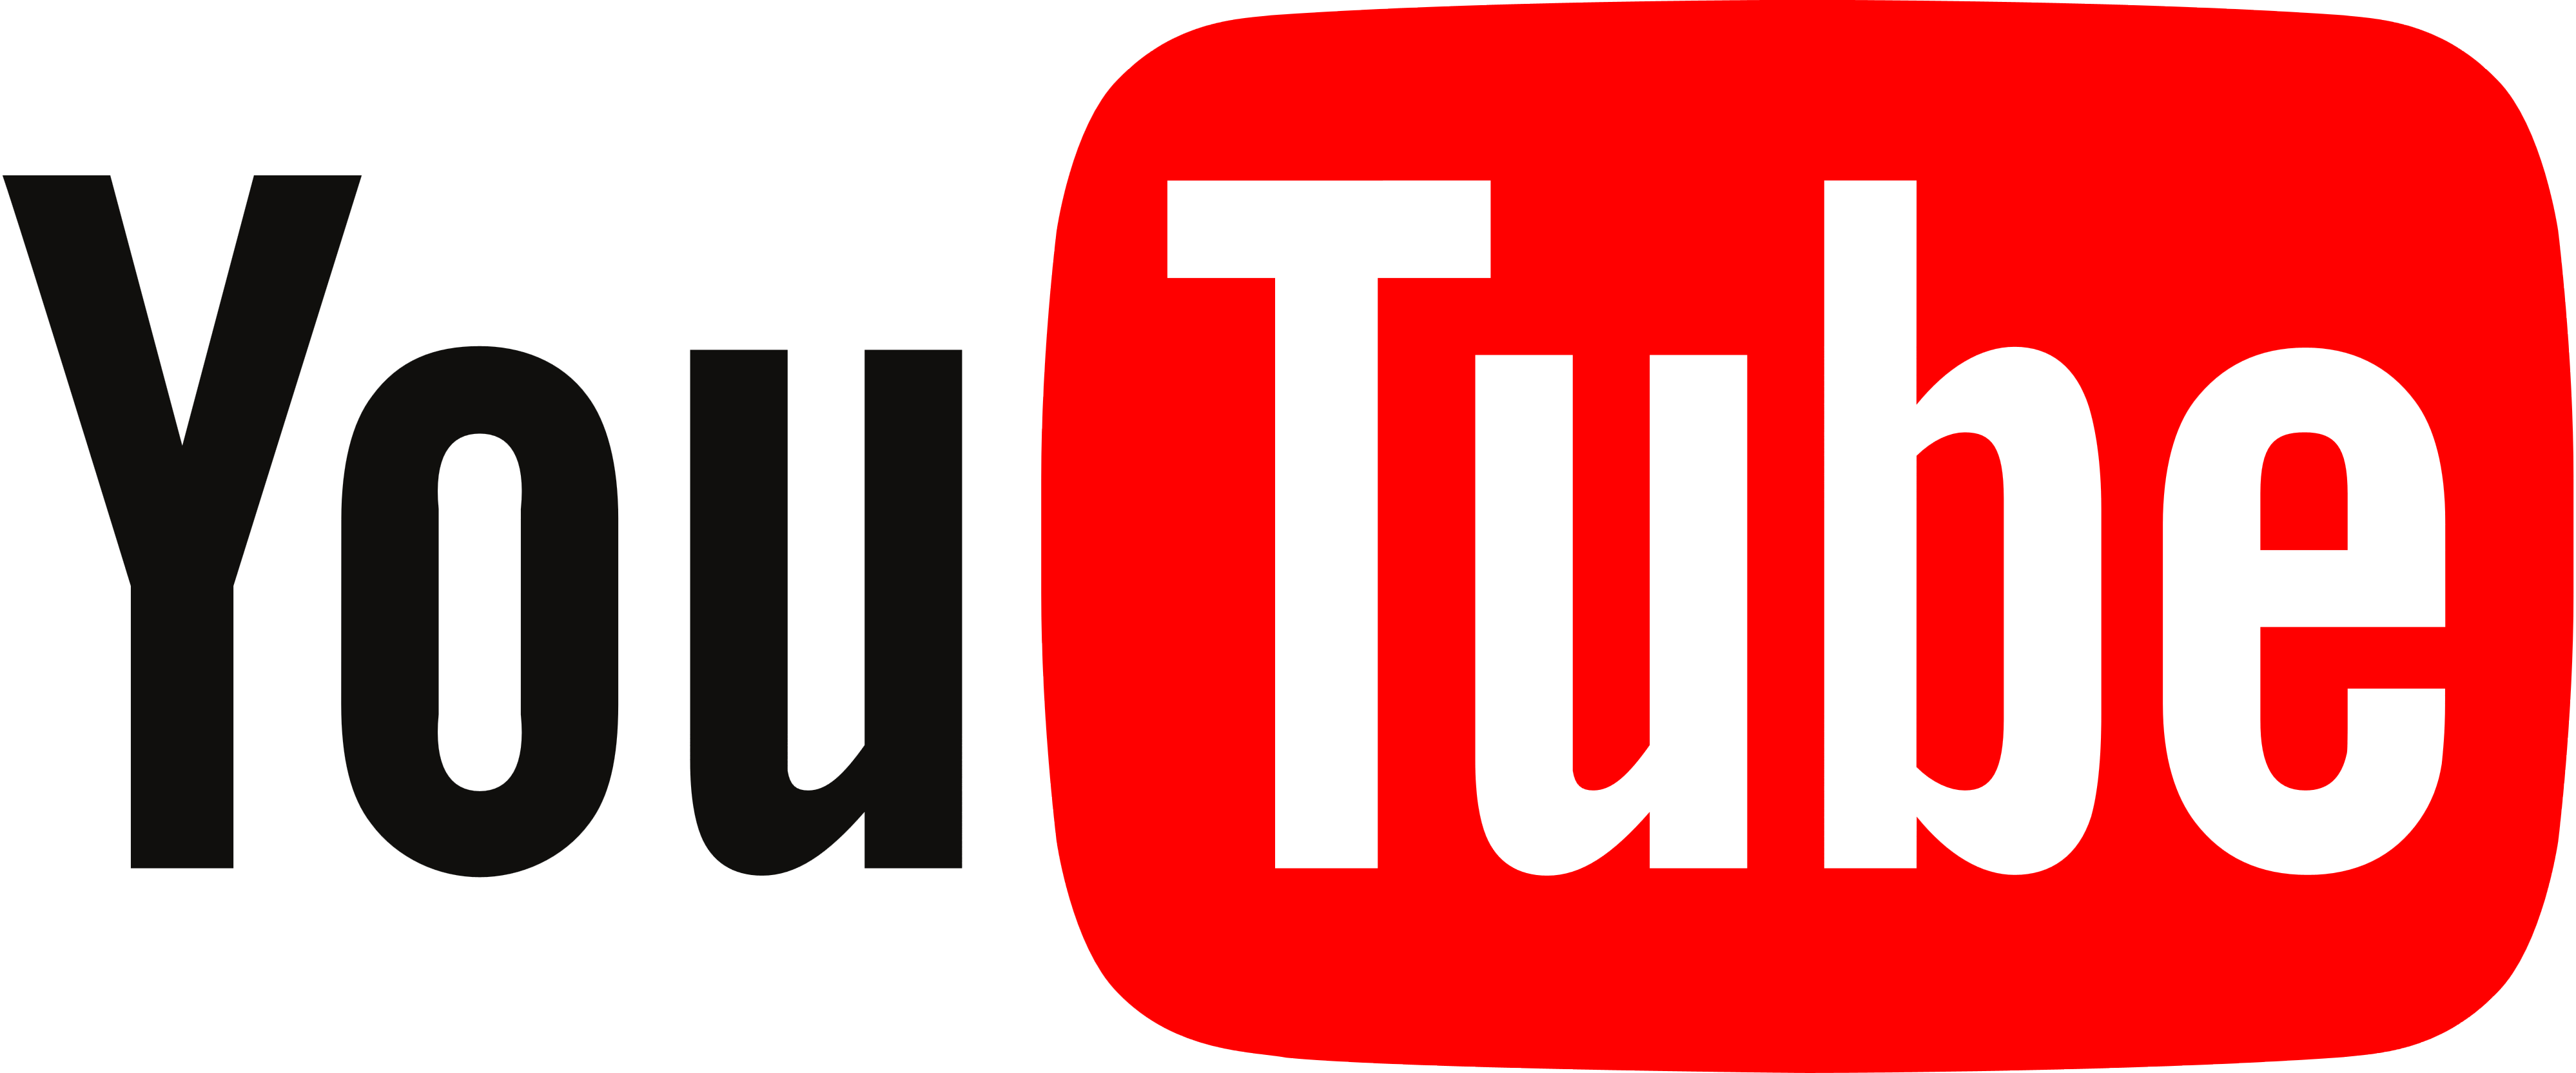 File:YouTube 2020.png - Wikimedia Commons